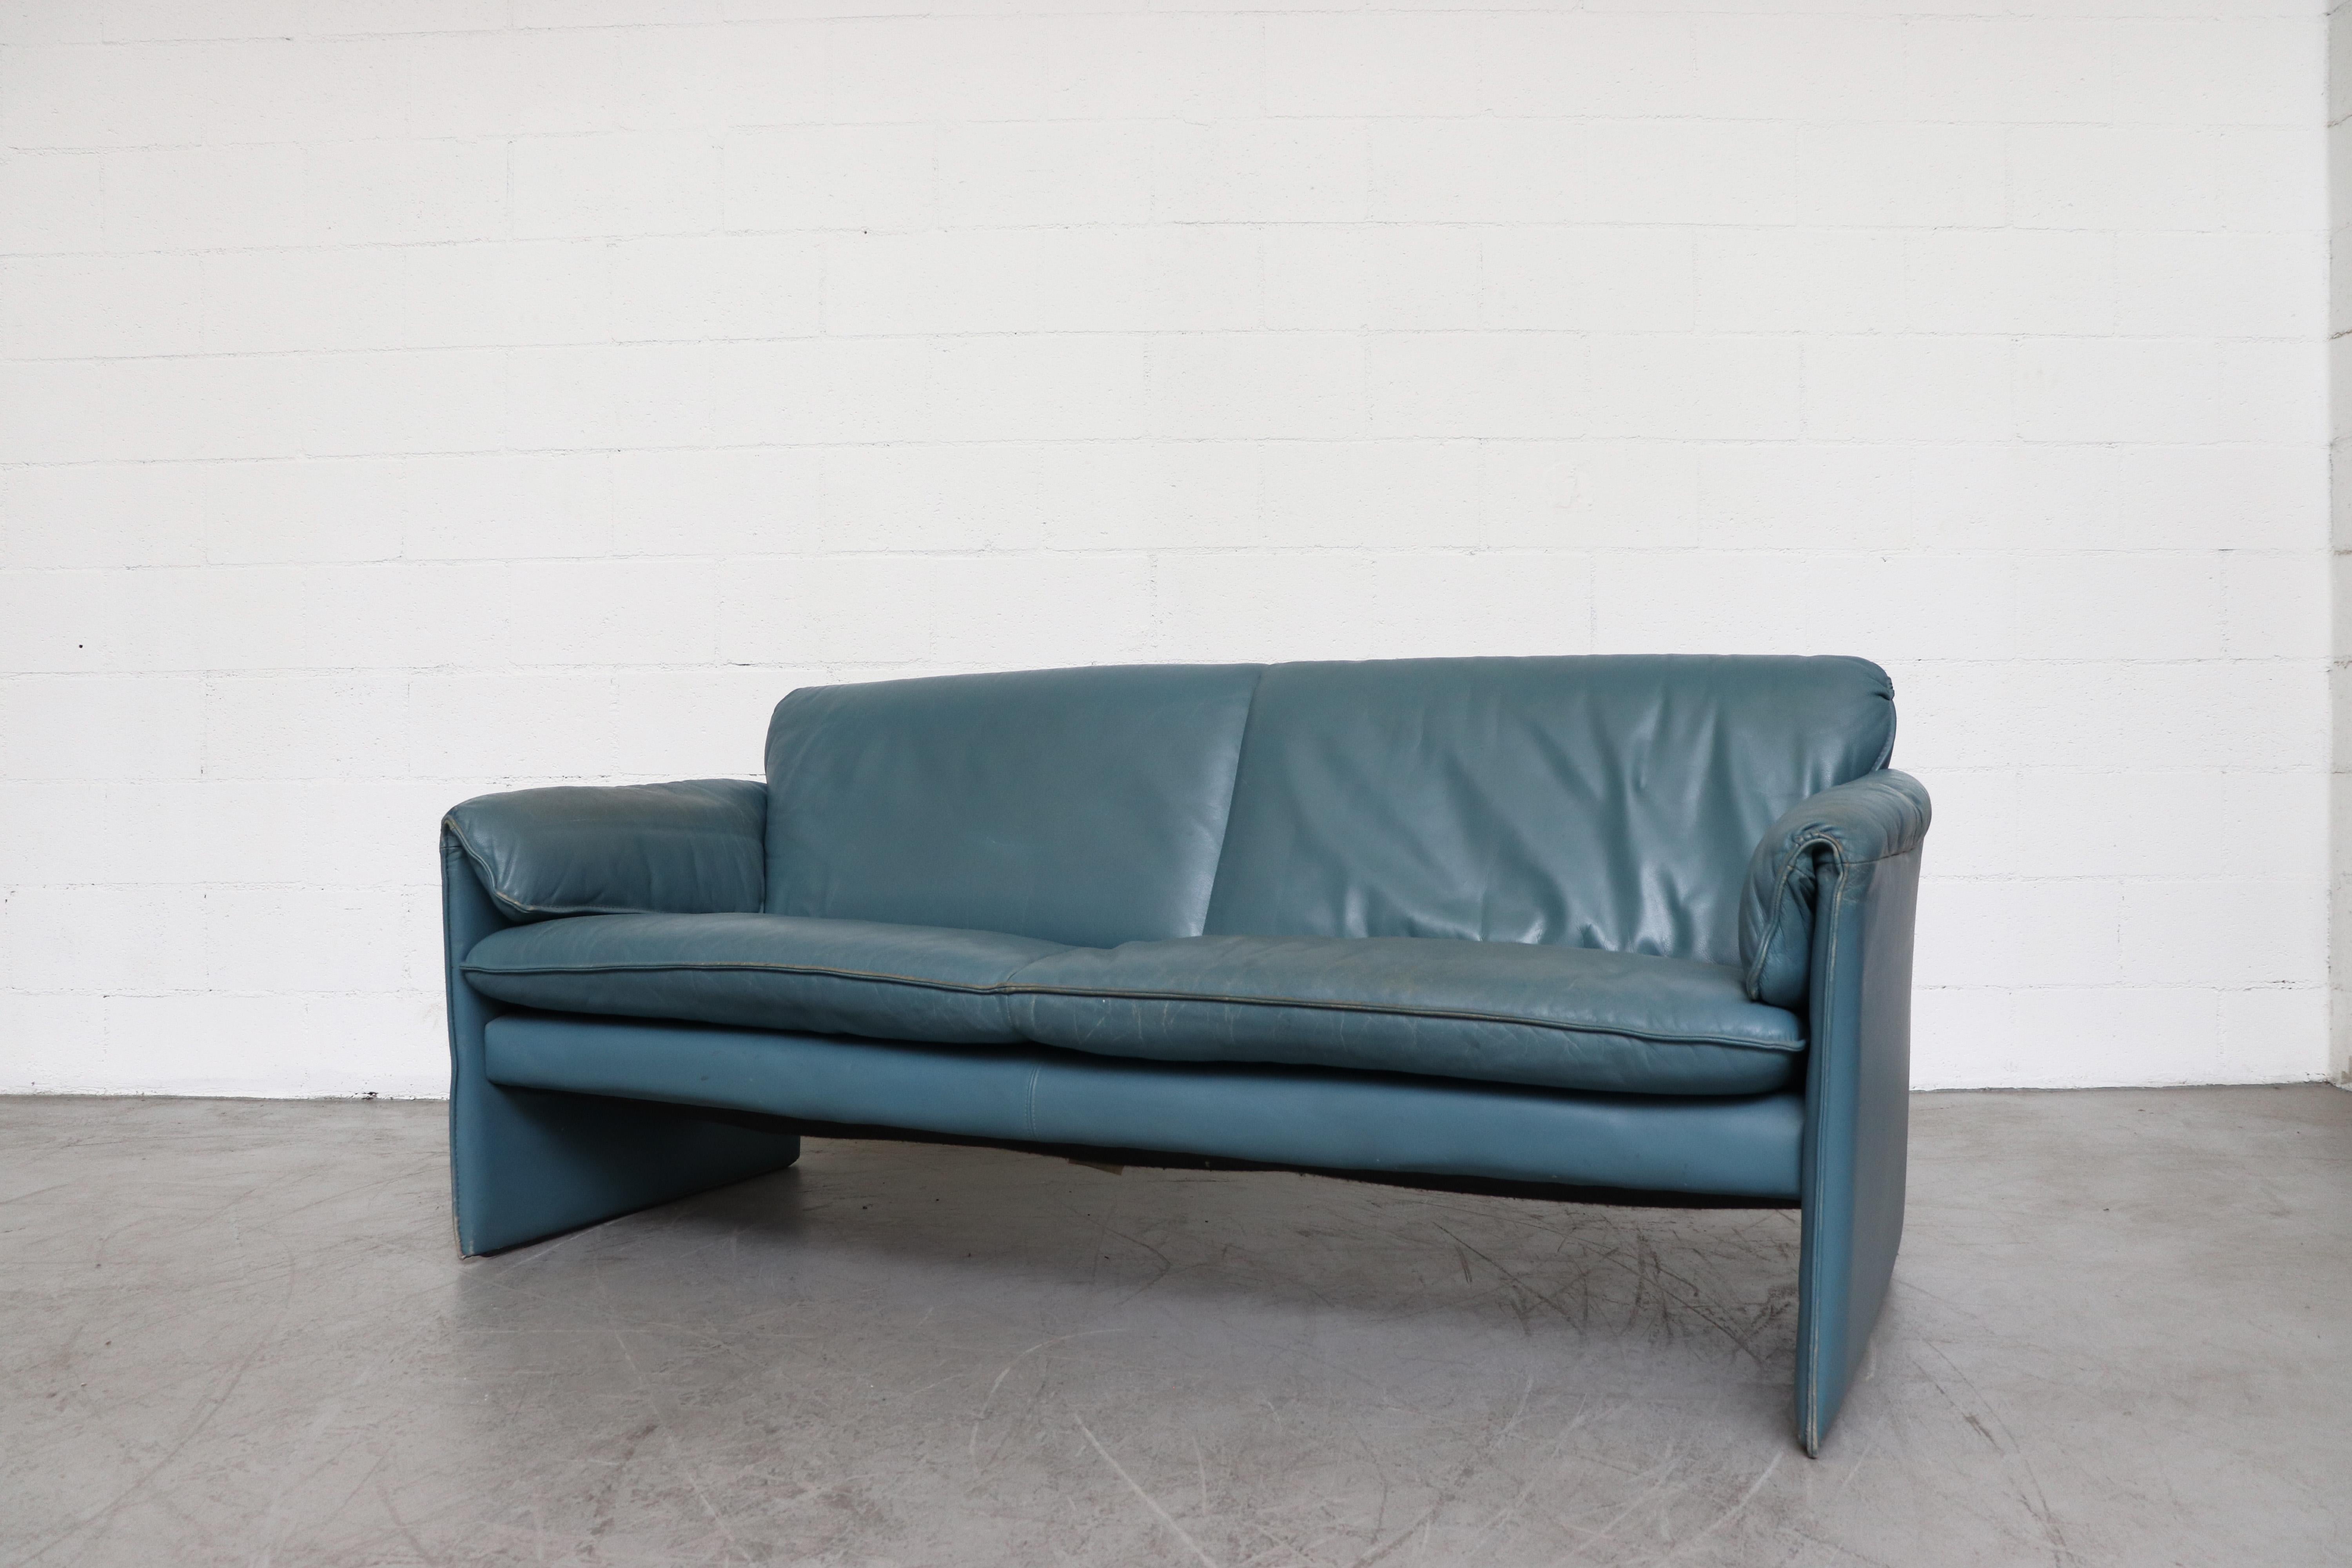 Super cute blue leather 'Bora Bora' 2-seat sofa by Leolux. In original condition with visible signs of wear consistent with its age and use, details in photos.